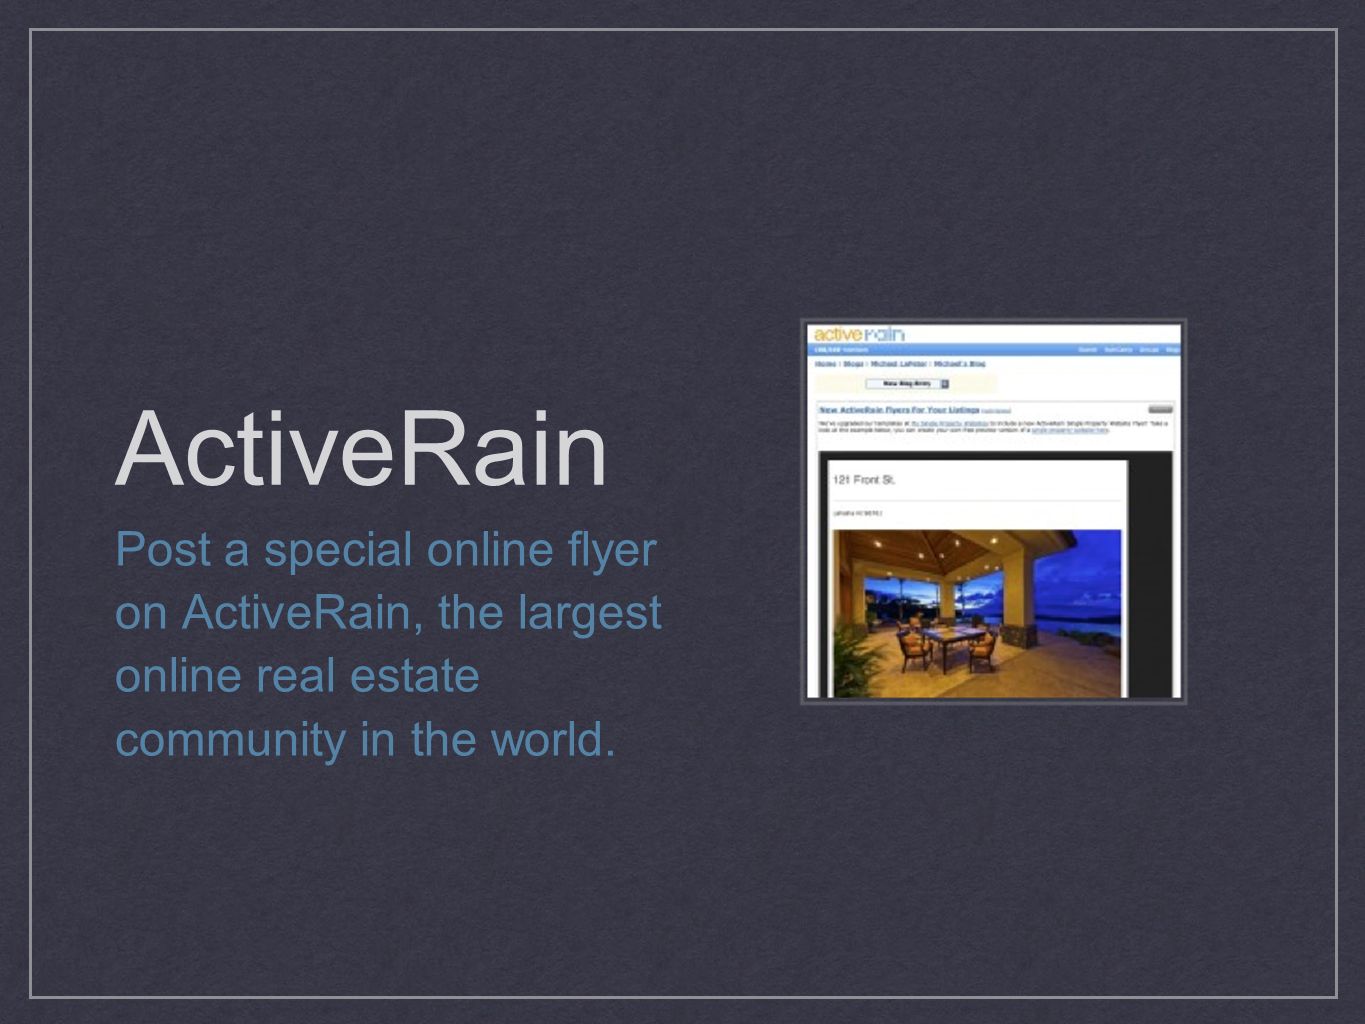 ActiveRain Post a special online flyer on ActiveRain, the largest online real estate community in the world.